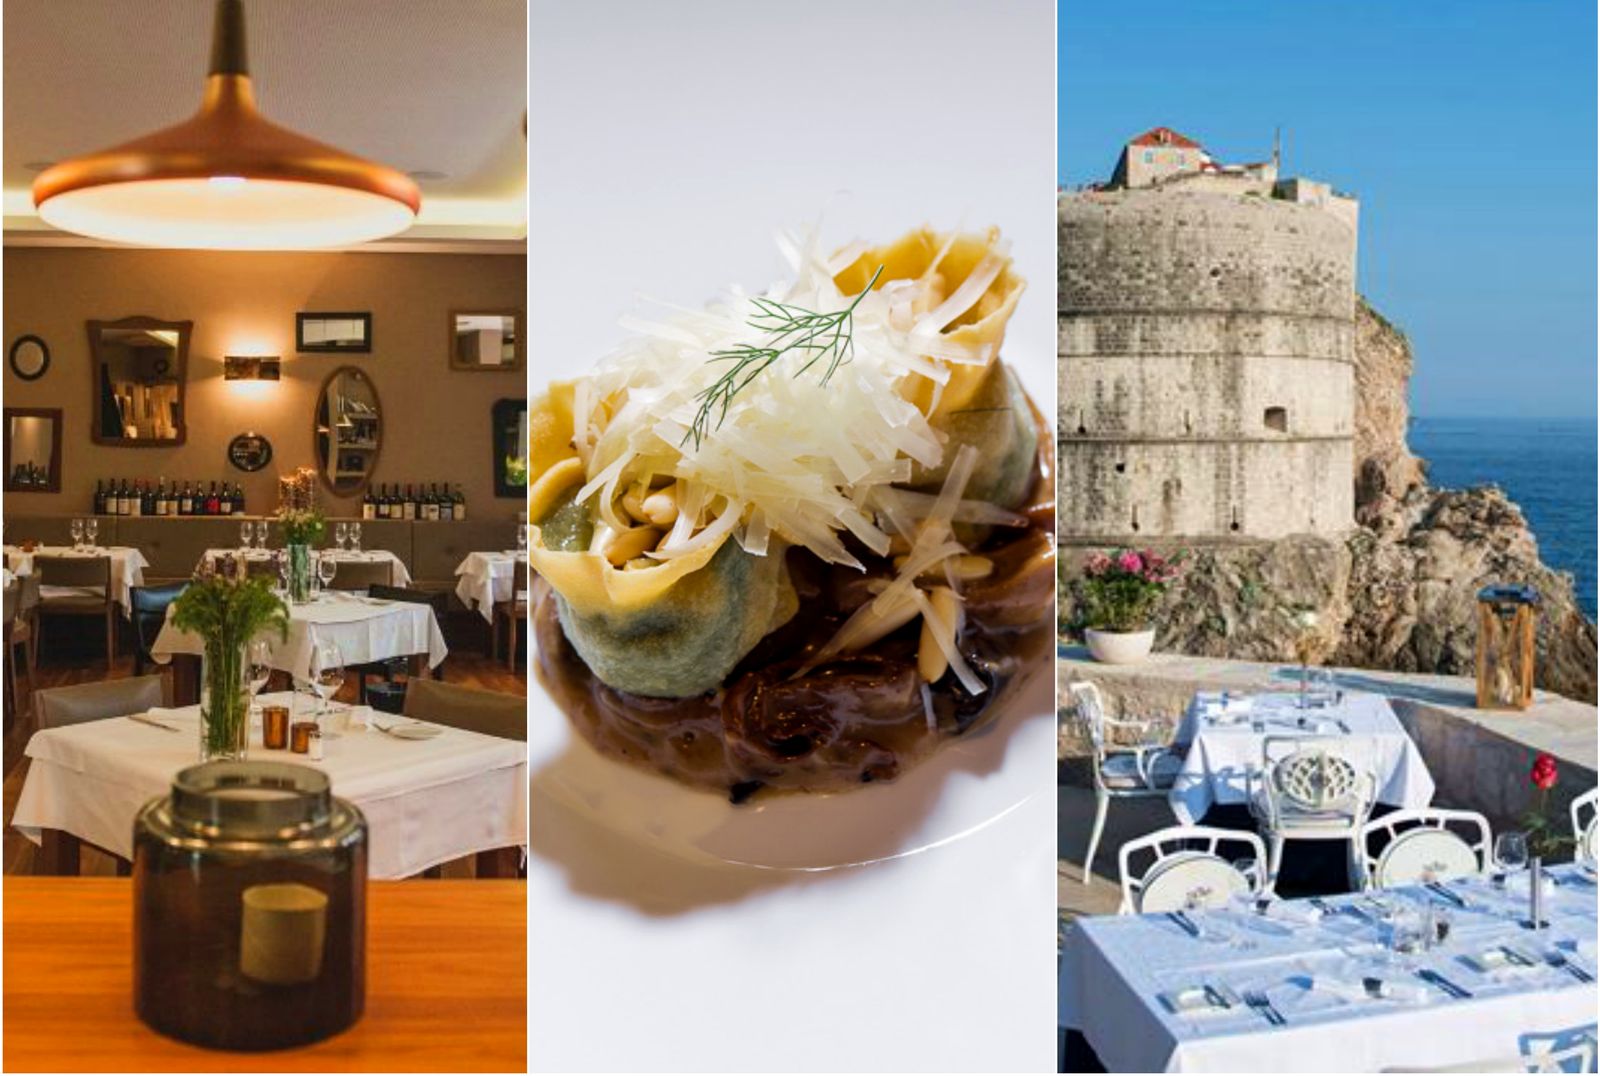 The Croatian Restaurants Which Made the 2017 Michelin Guide